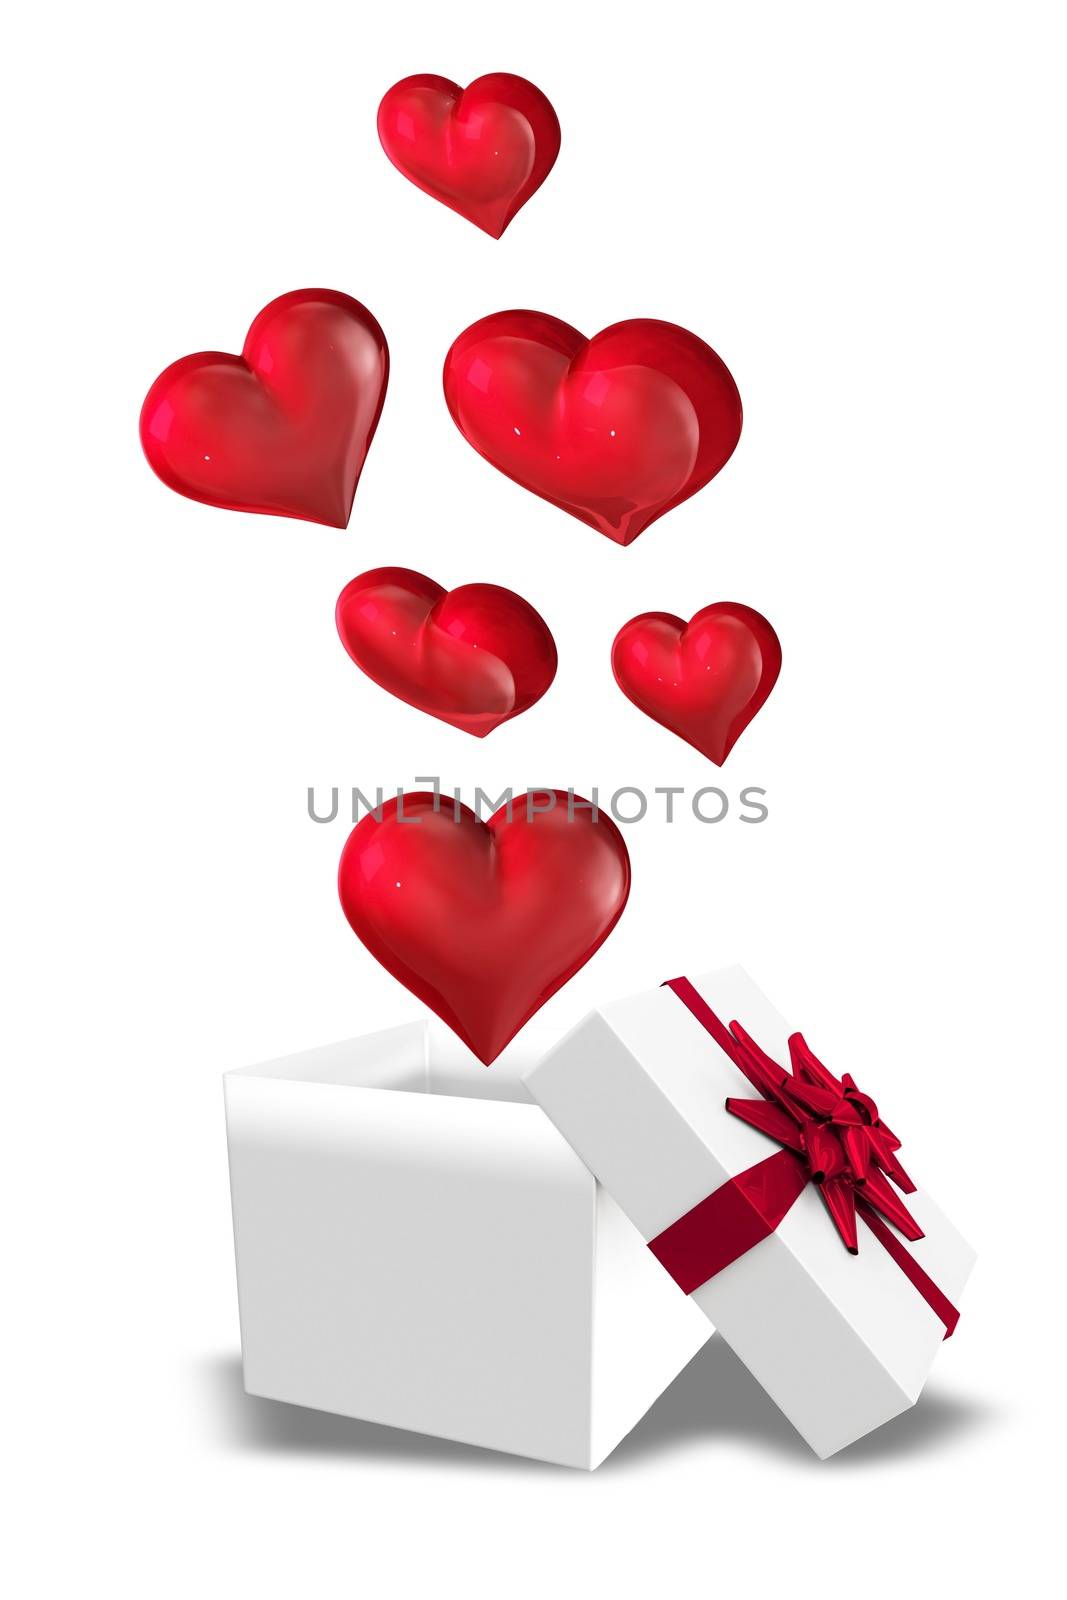 Hearts flying from box on white background